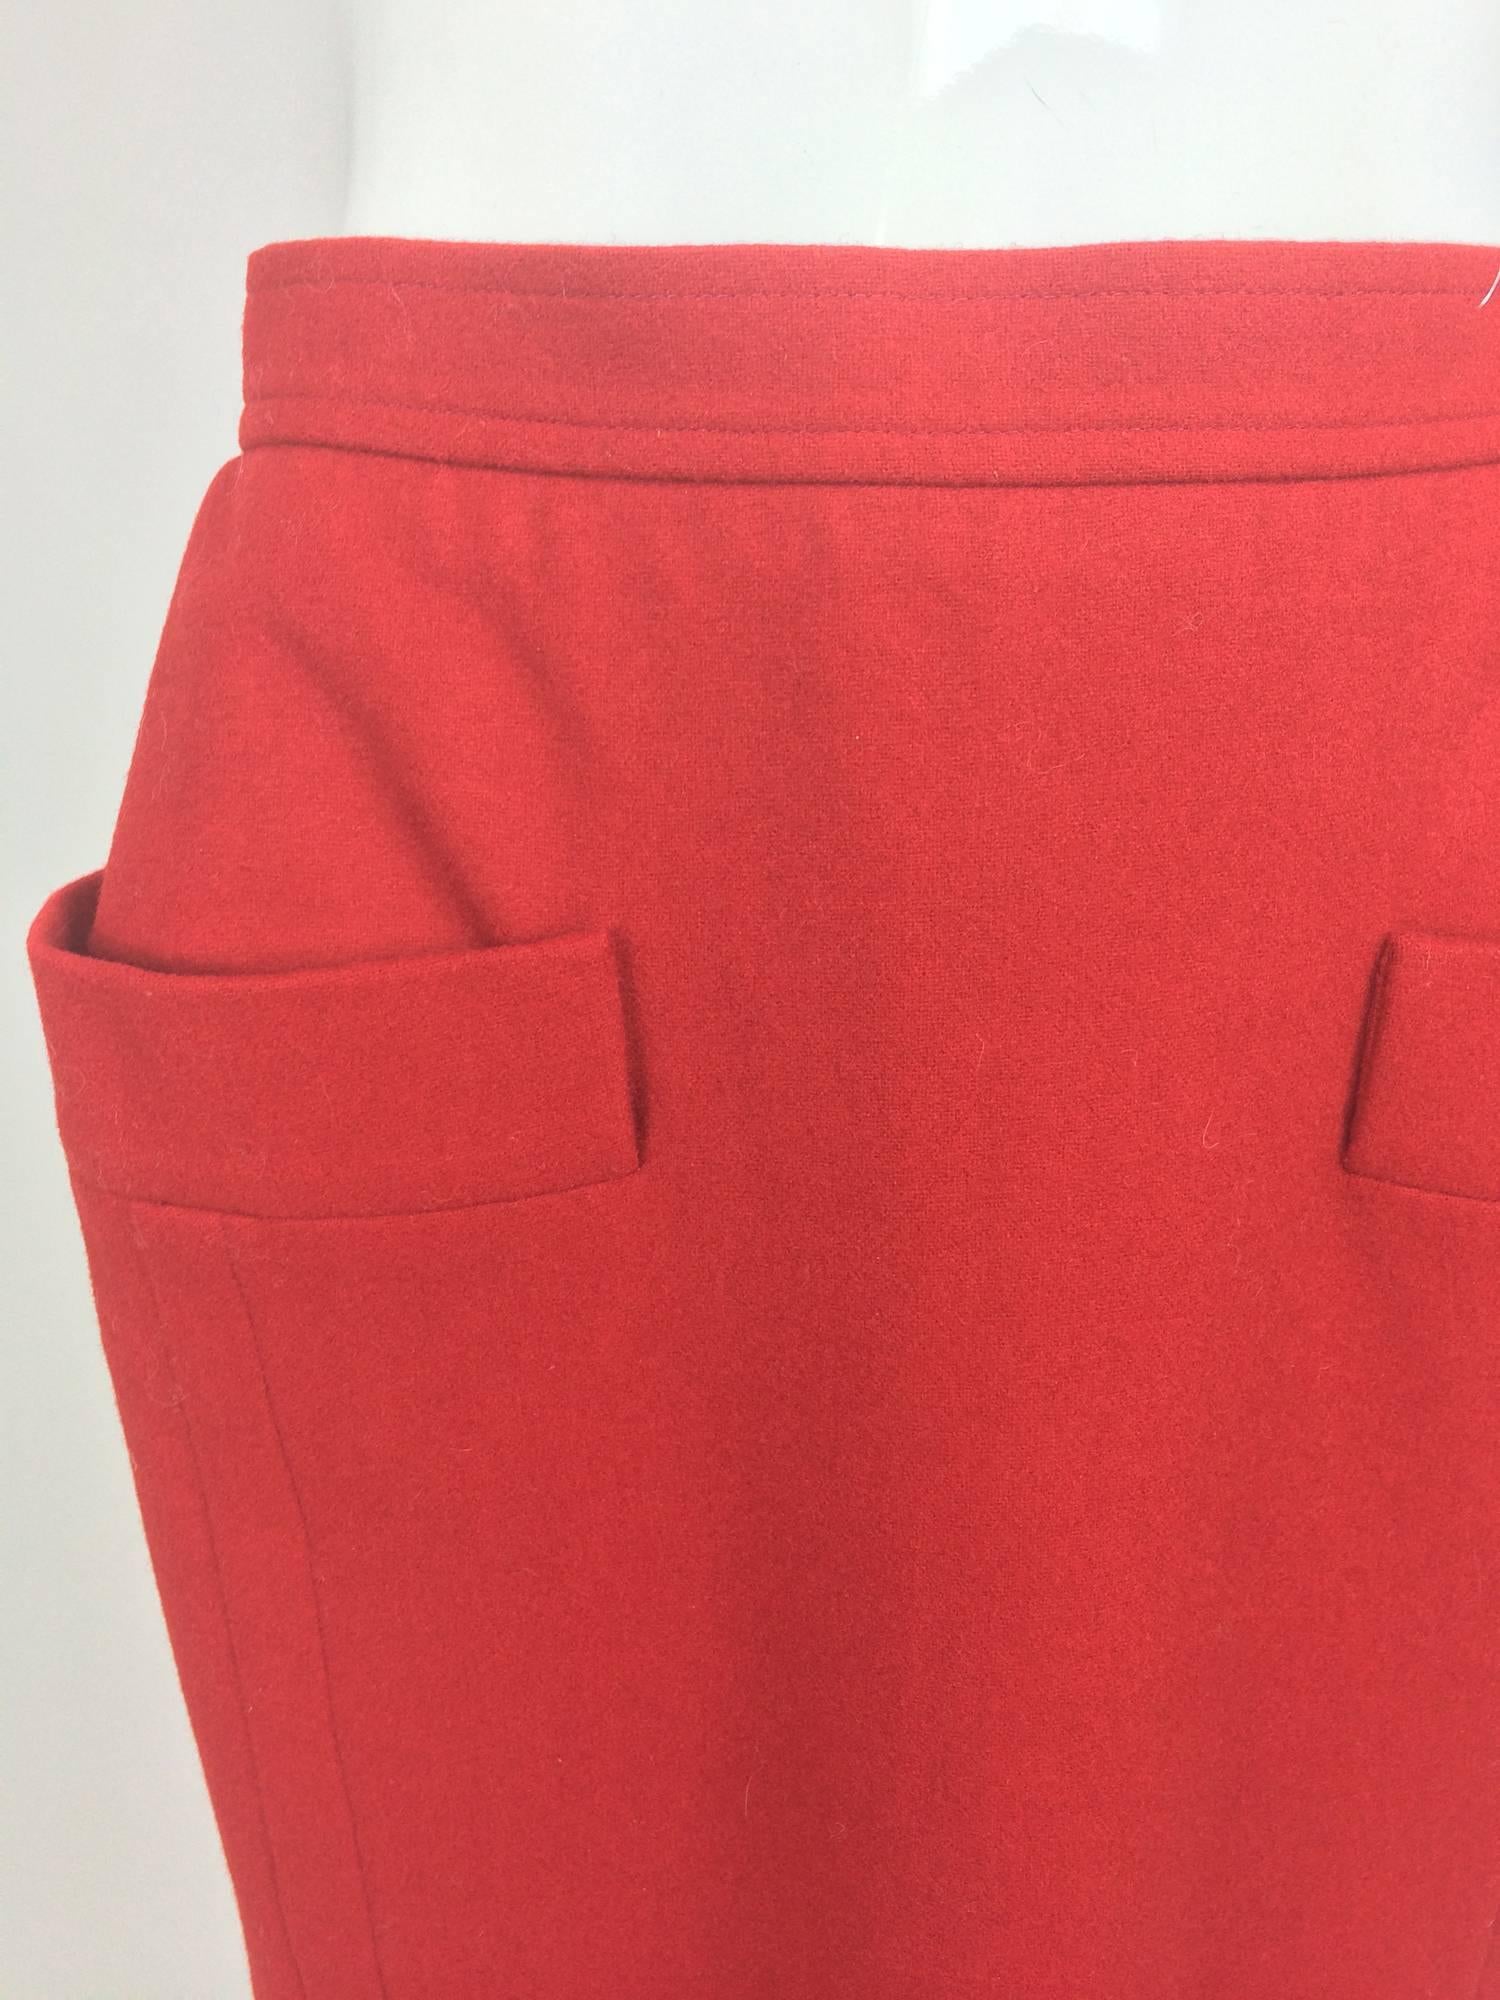 Yves Saint Laurent fine brick red wool straight skirt with hip front pockets from the 1980s...Banded waist skirt closes at the side with a zipper and button at the waist...Four top stitched seams two at the front and two at the back...Fully lined
In